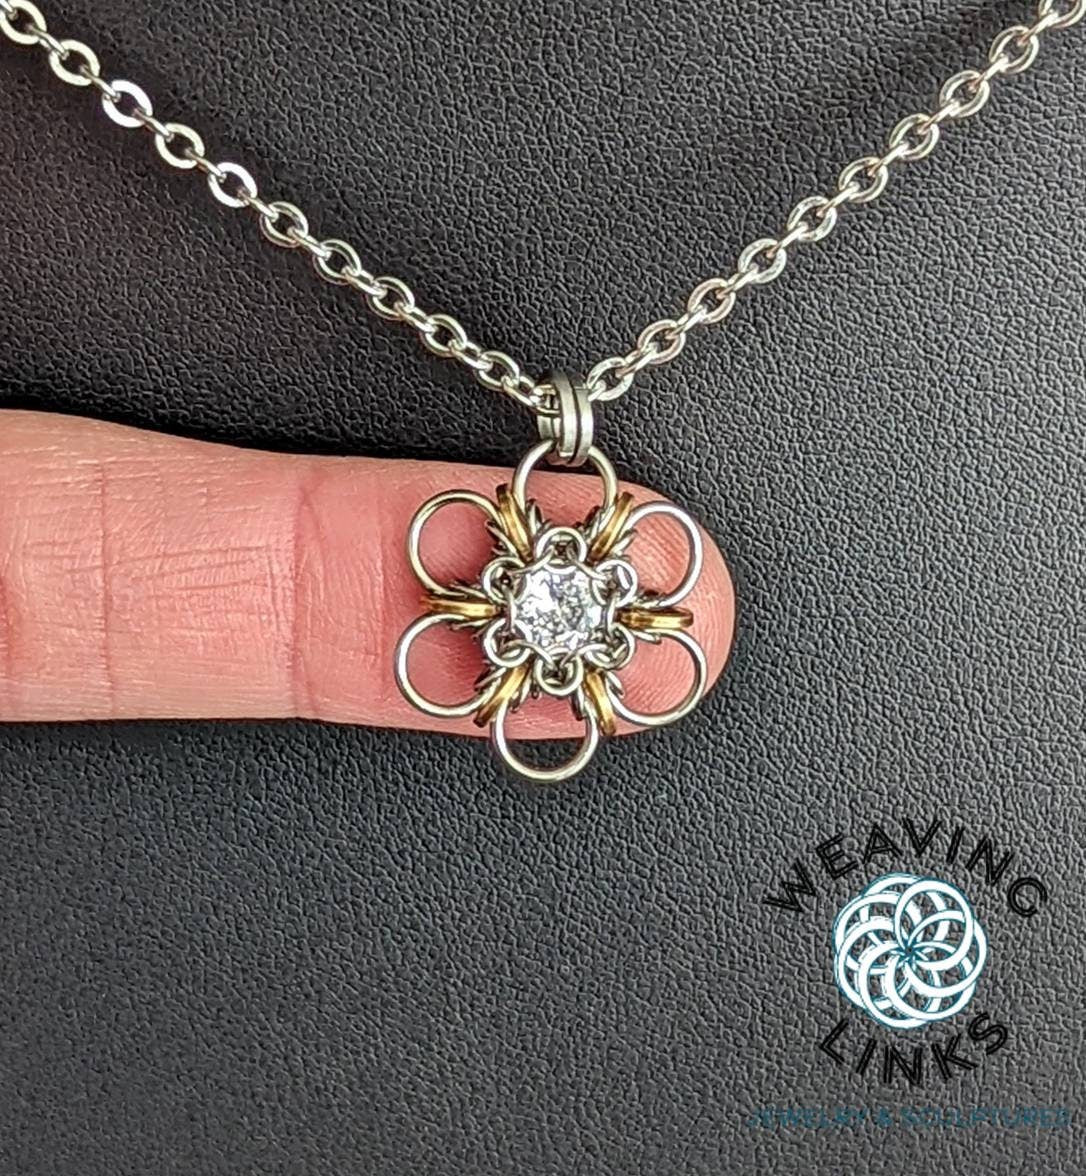 Instructions For You're No Daisy Flower Pendant